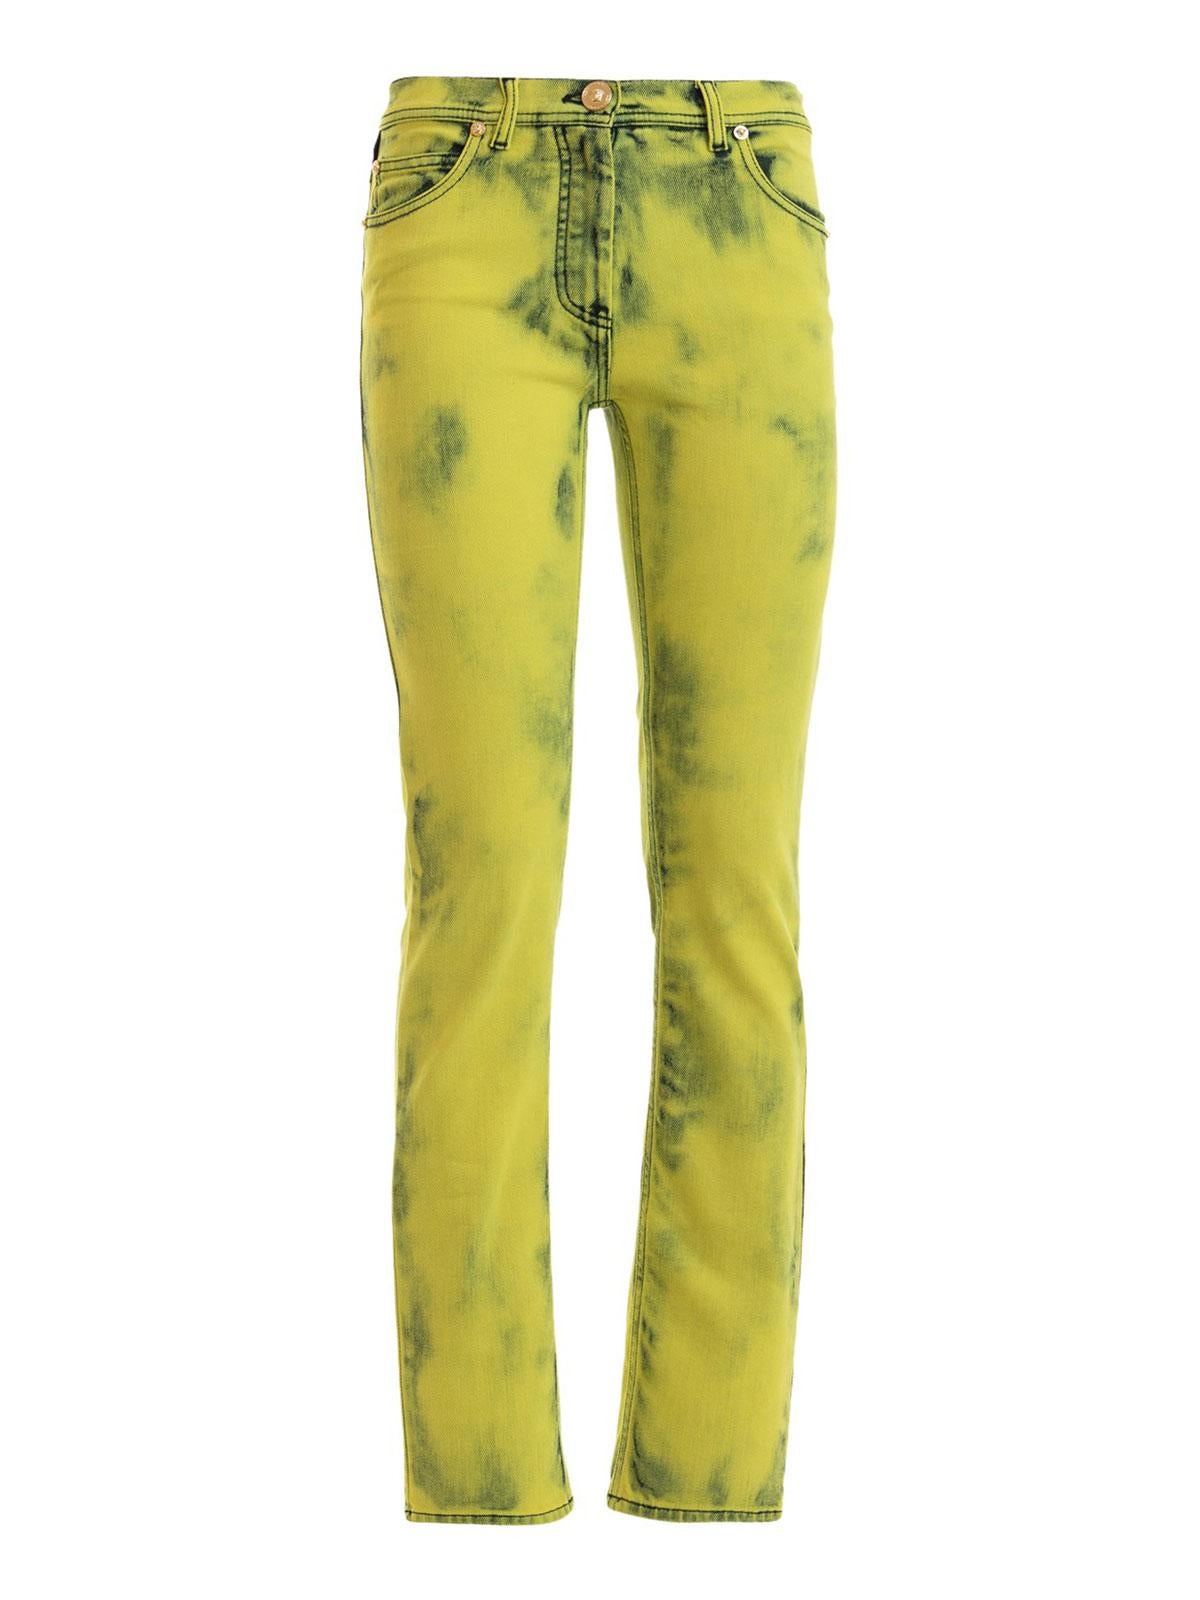 Versace Yellow Acid Wash Denim Skinny Jeans with Logo Label Size 29 For Sale 2